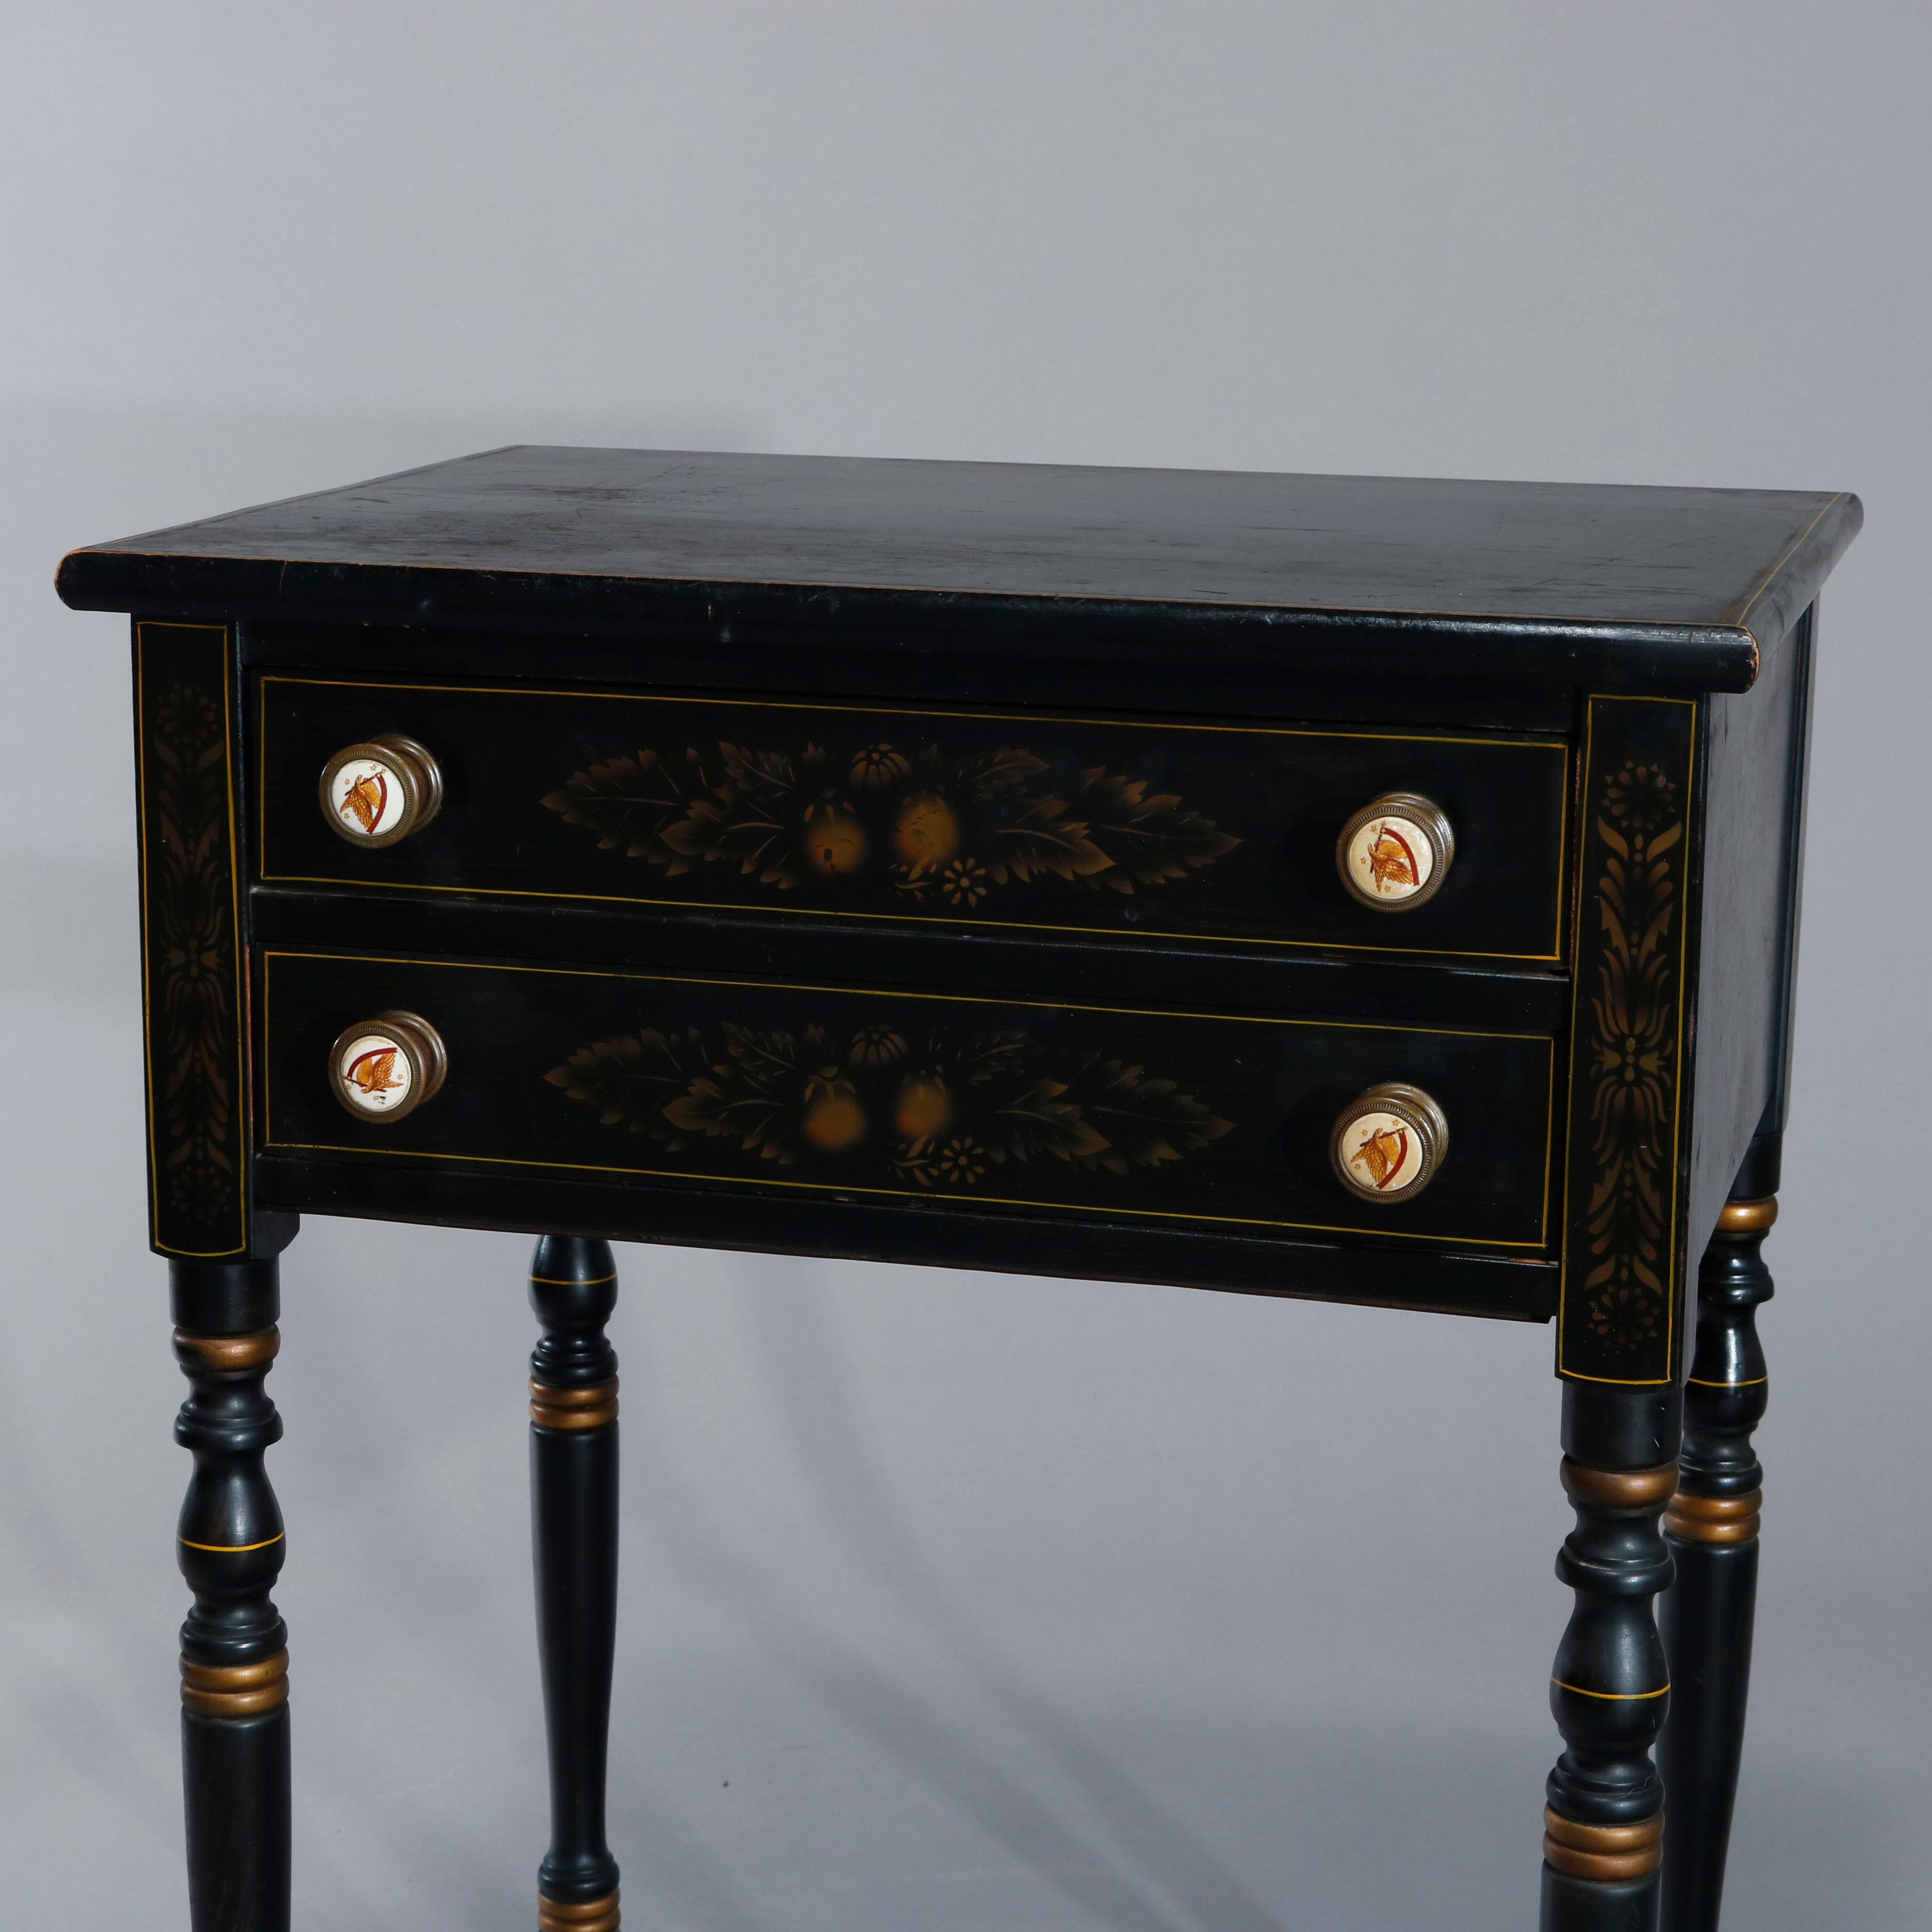 Wood Vintage Hitchcock Parcel-Gilt and Paint Decorated Ebonized Side Table circa 1950